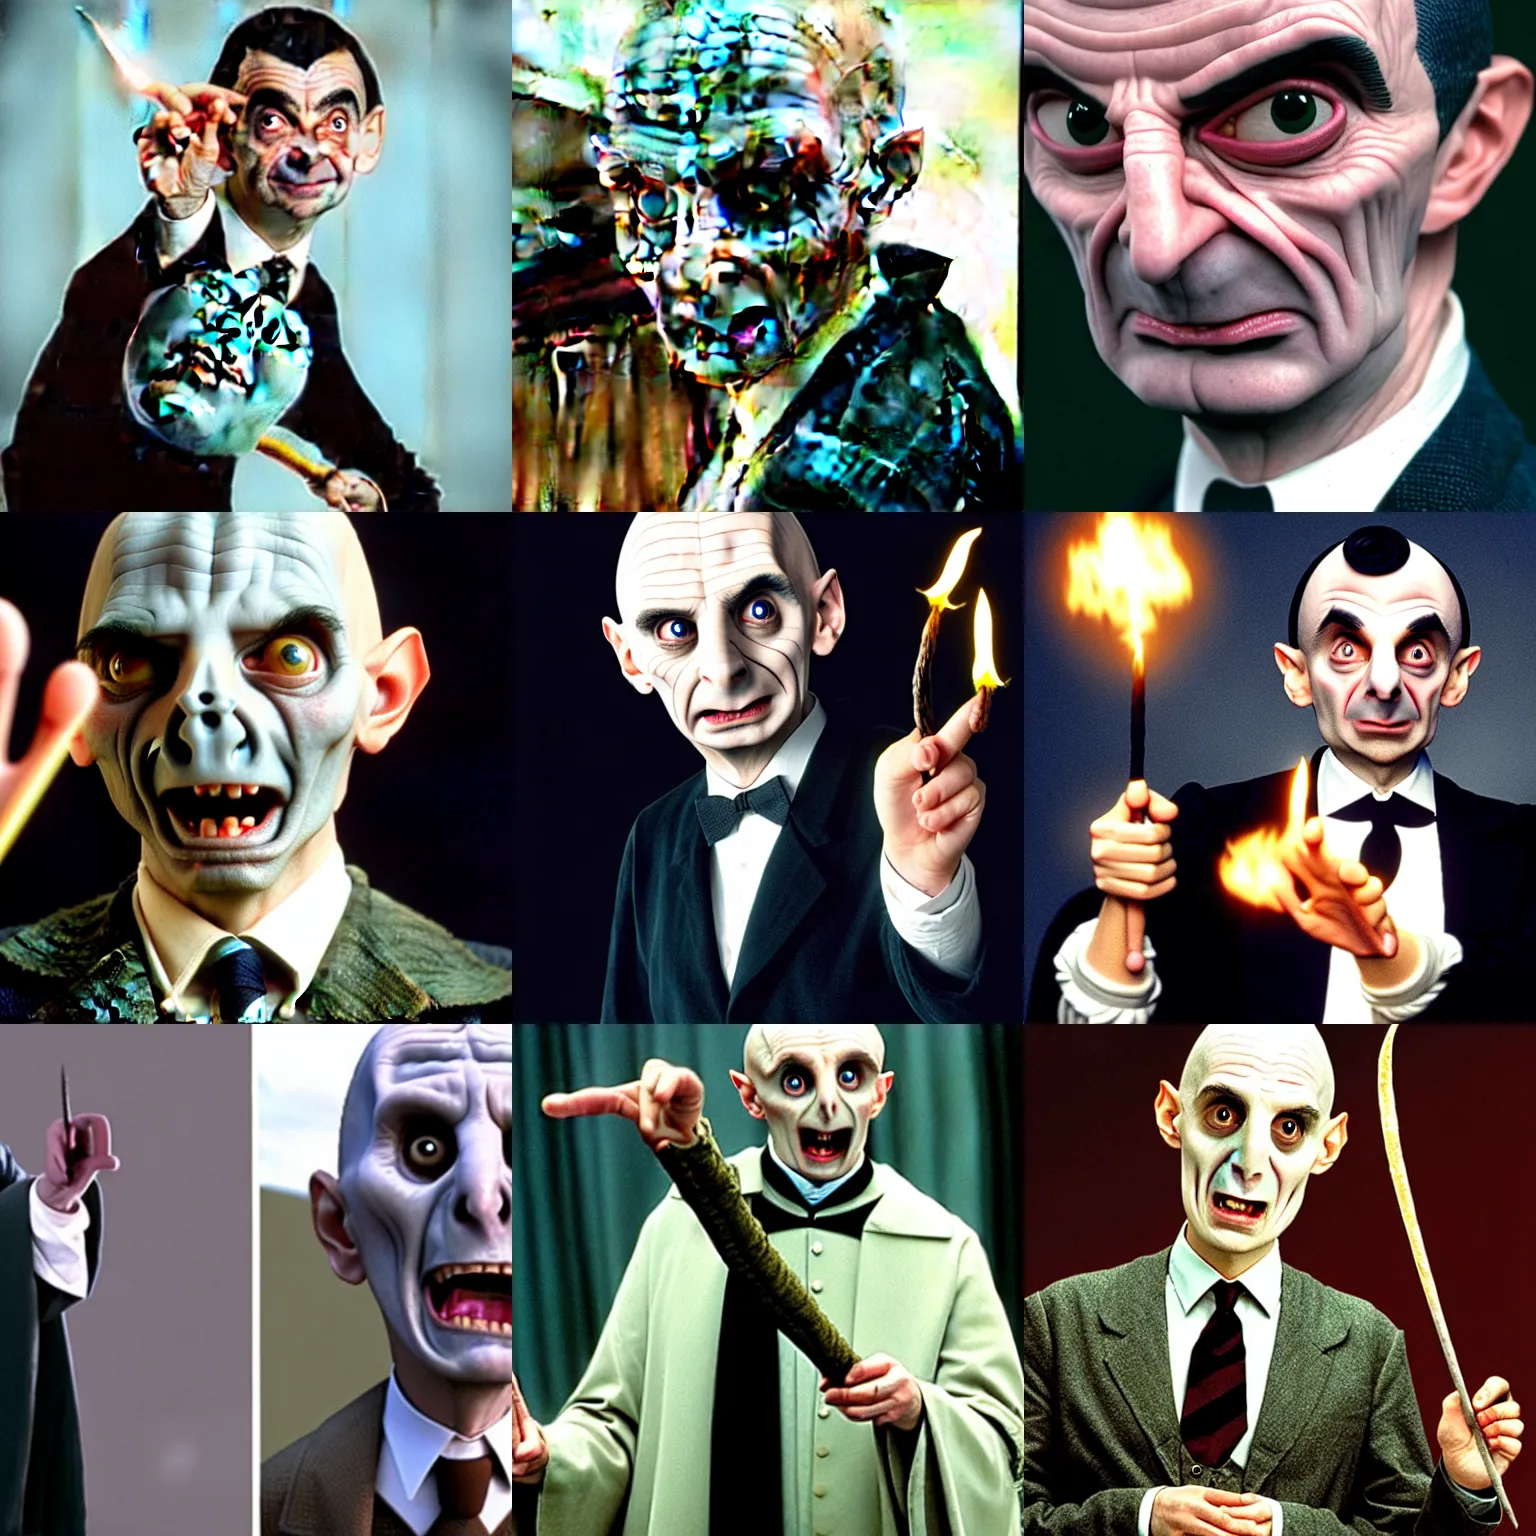 Prompt: mr bean as voldemort, casting a spell